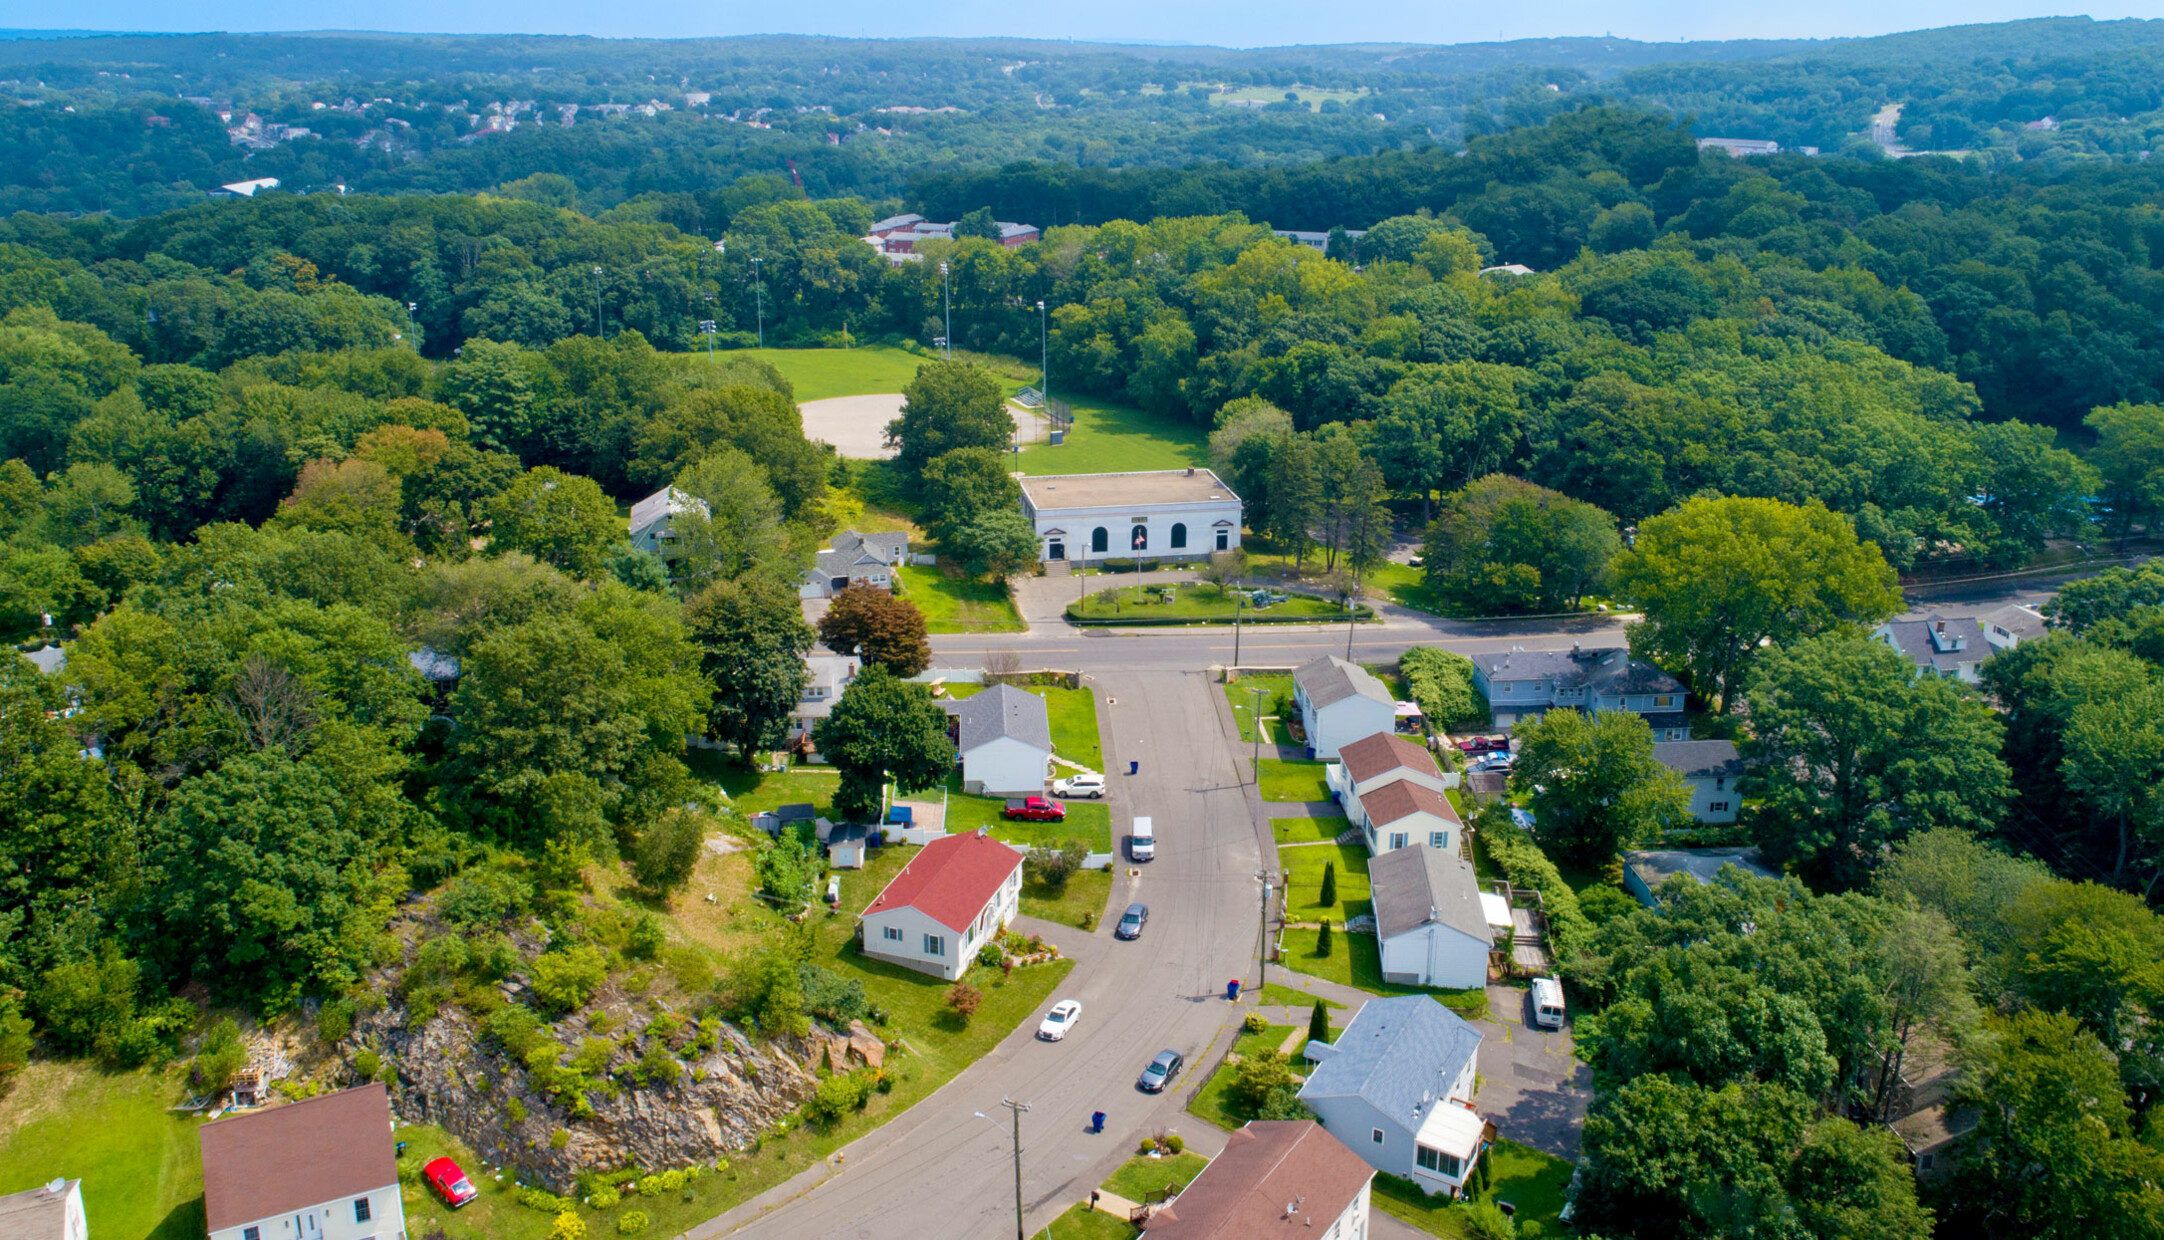 An aerial view of houses and streets in the Washington Park neighborhood in Waterbury